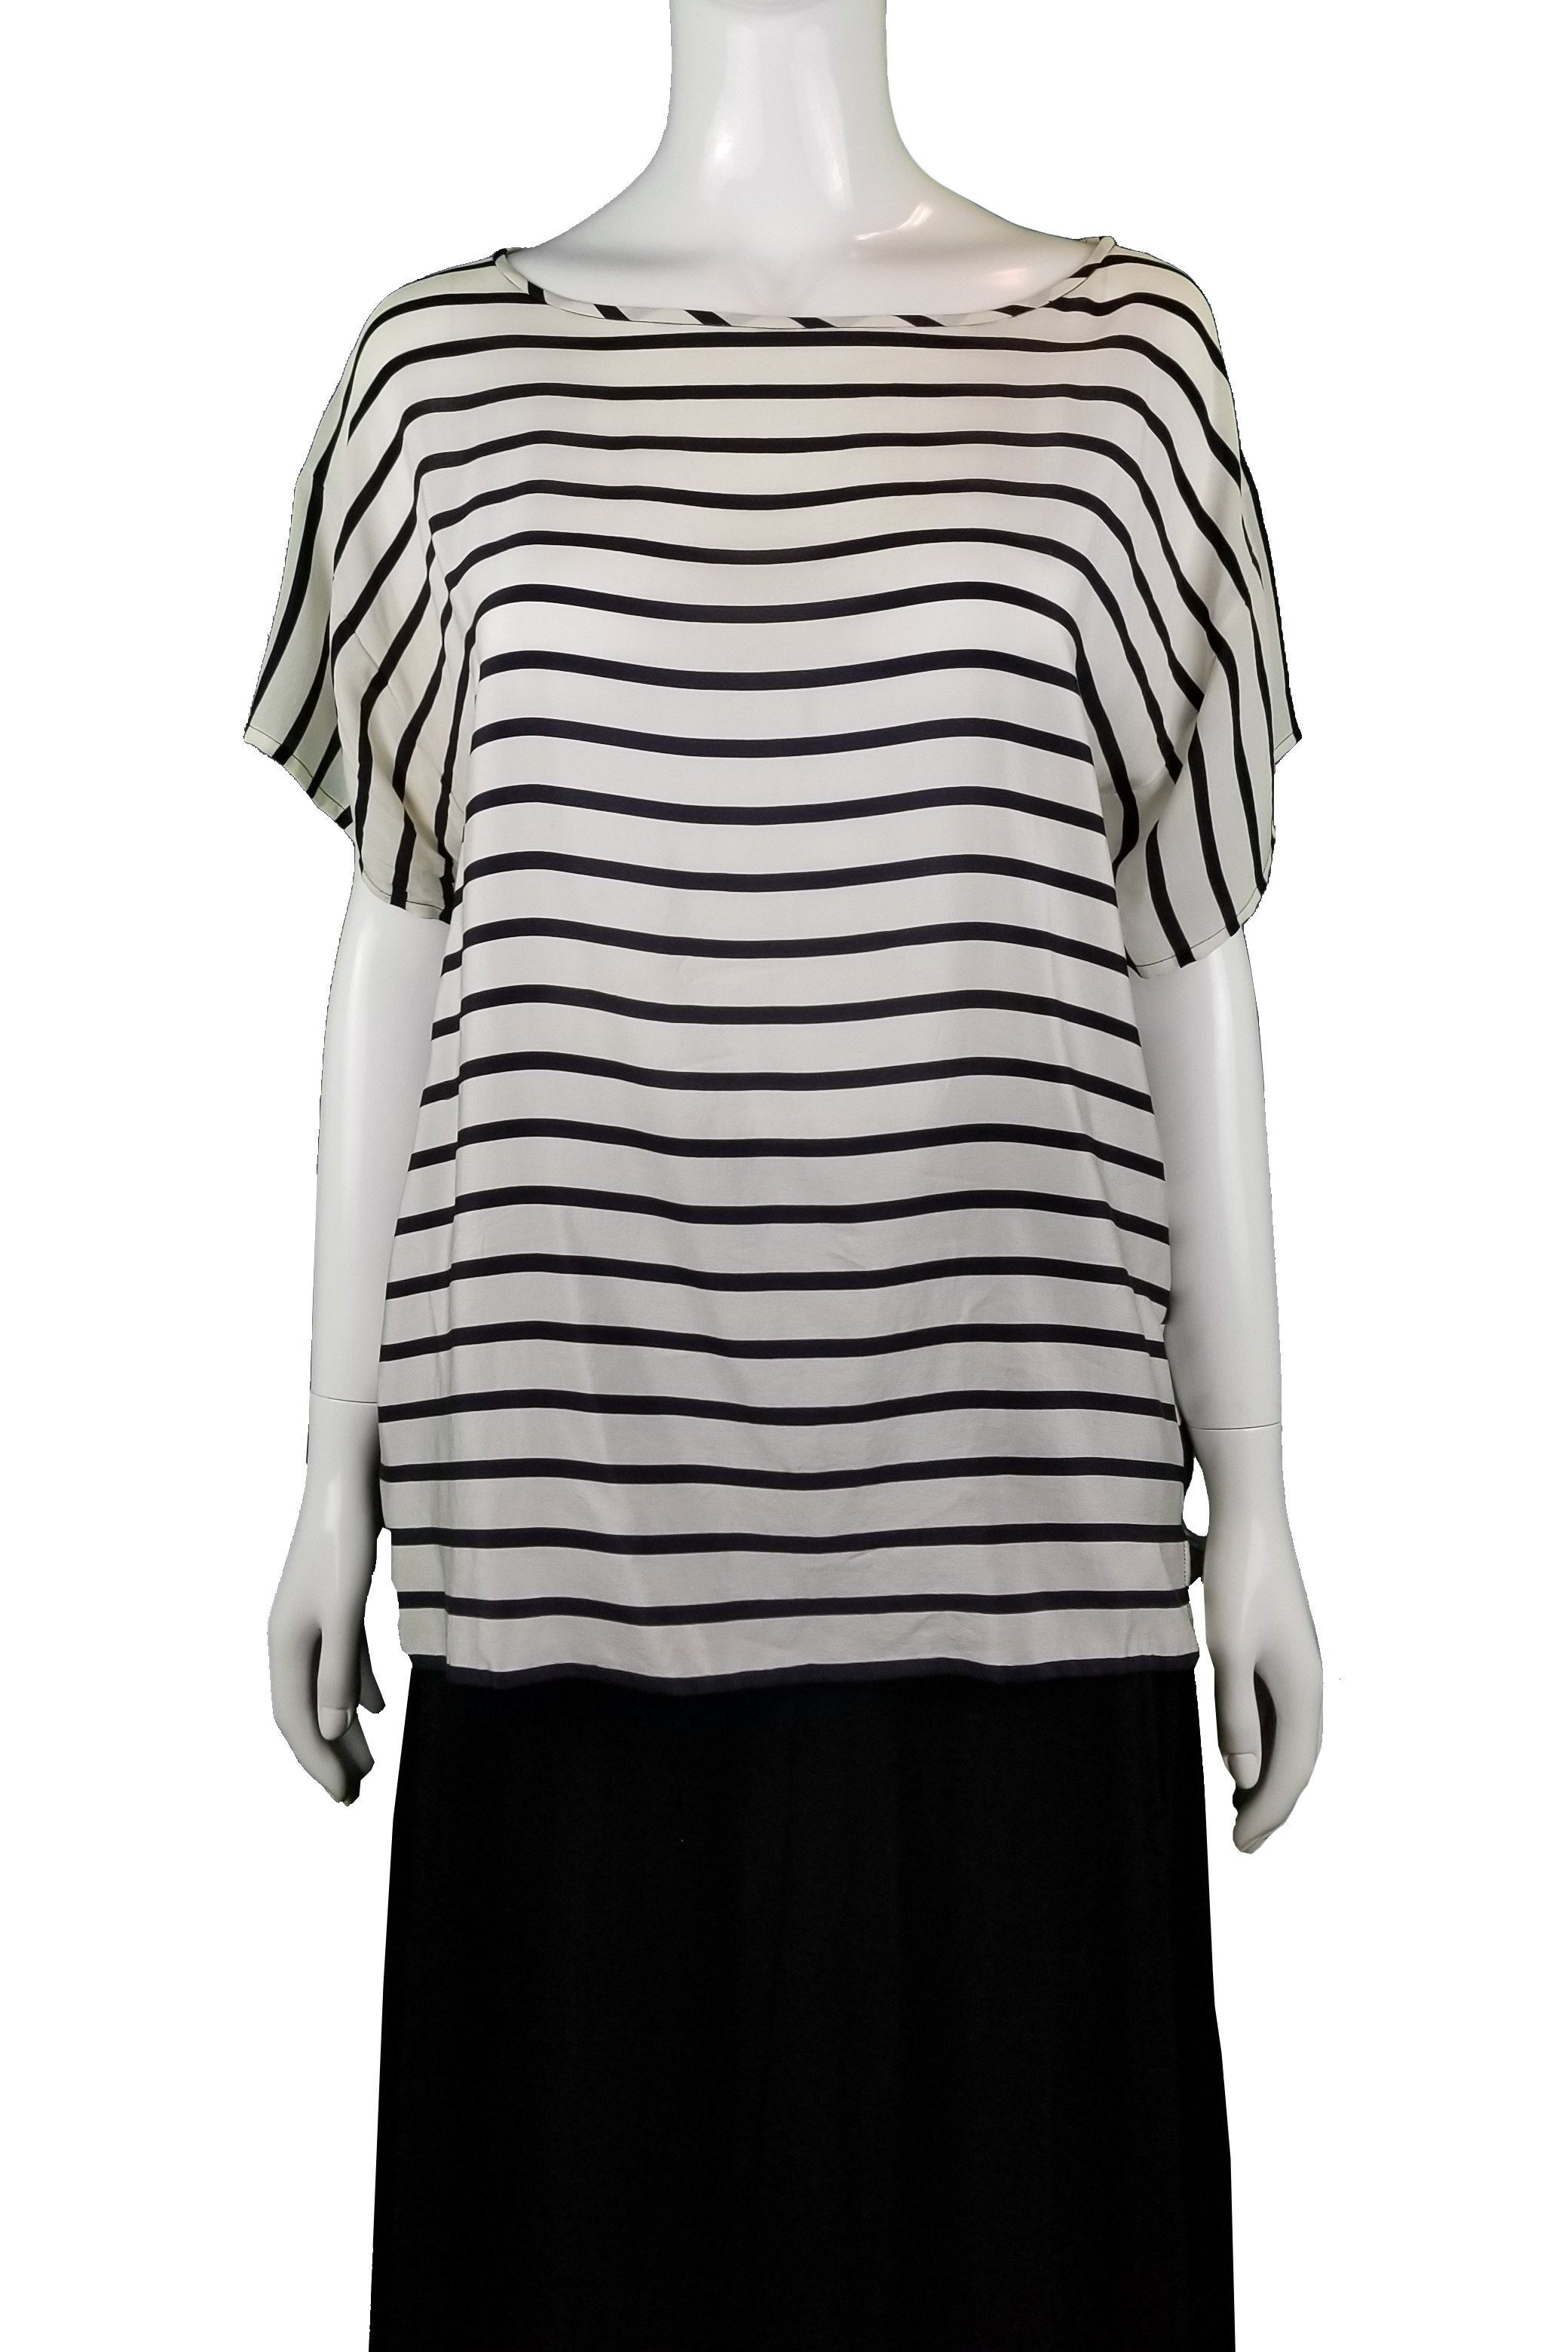 Club Monaco B/W Stripped Shirt, Feeling a little unconventional? Get this cute stripped  shirt with front and back of different patterns., Black, White, 100% Silk, women's Tops, women's Black, White Tops, Club Monaco women's Tops, Women's black and white top, women's top, women's shirt, women's summer top